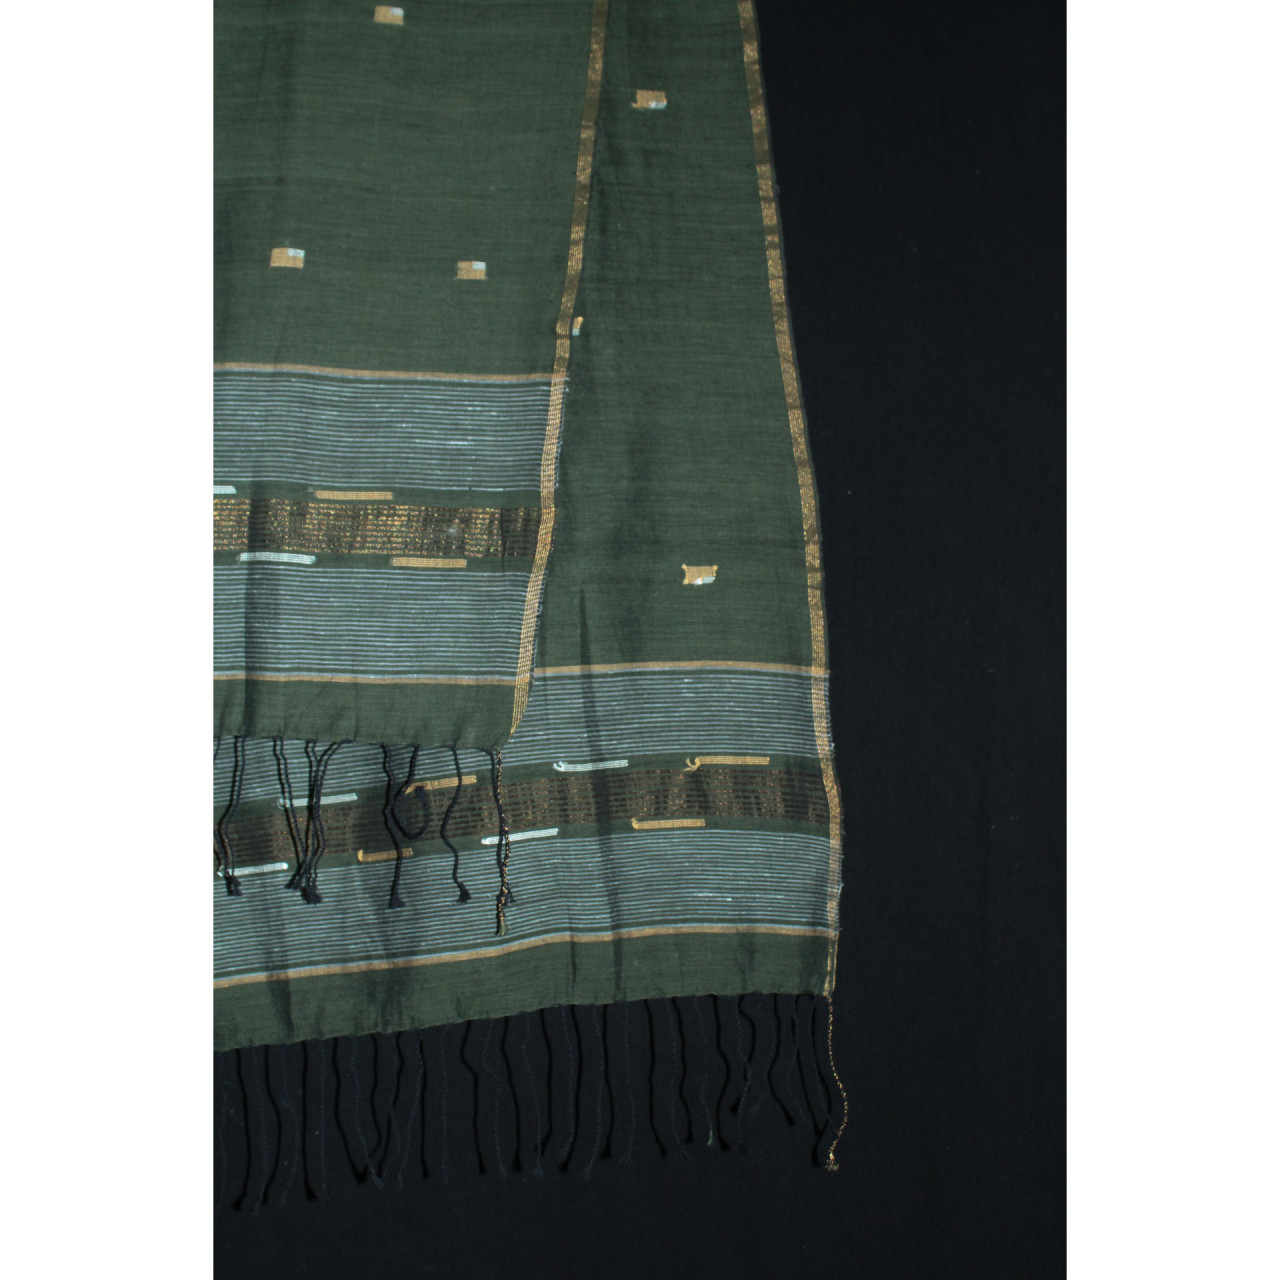 (1800) Cotton and khadi  Azo-free dyed stole from Shantipur with motifs - Green, black, golden, motif